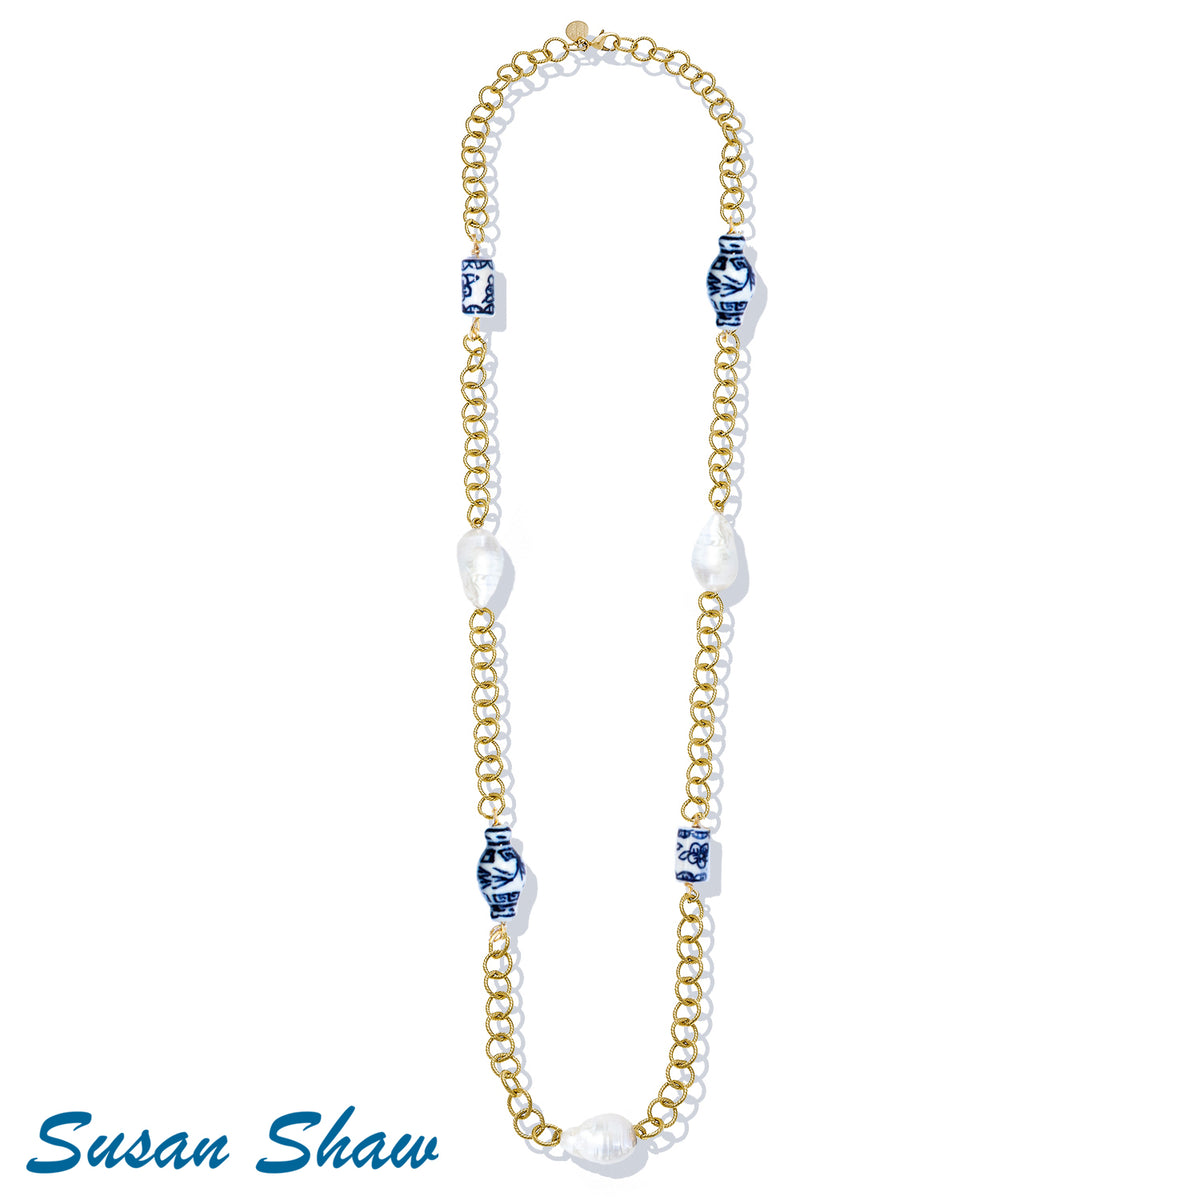 Susan Shaw 30" Gold Chain, Genuine Freshwater Baroque Pearl & Porcelain Bead Necklace